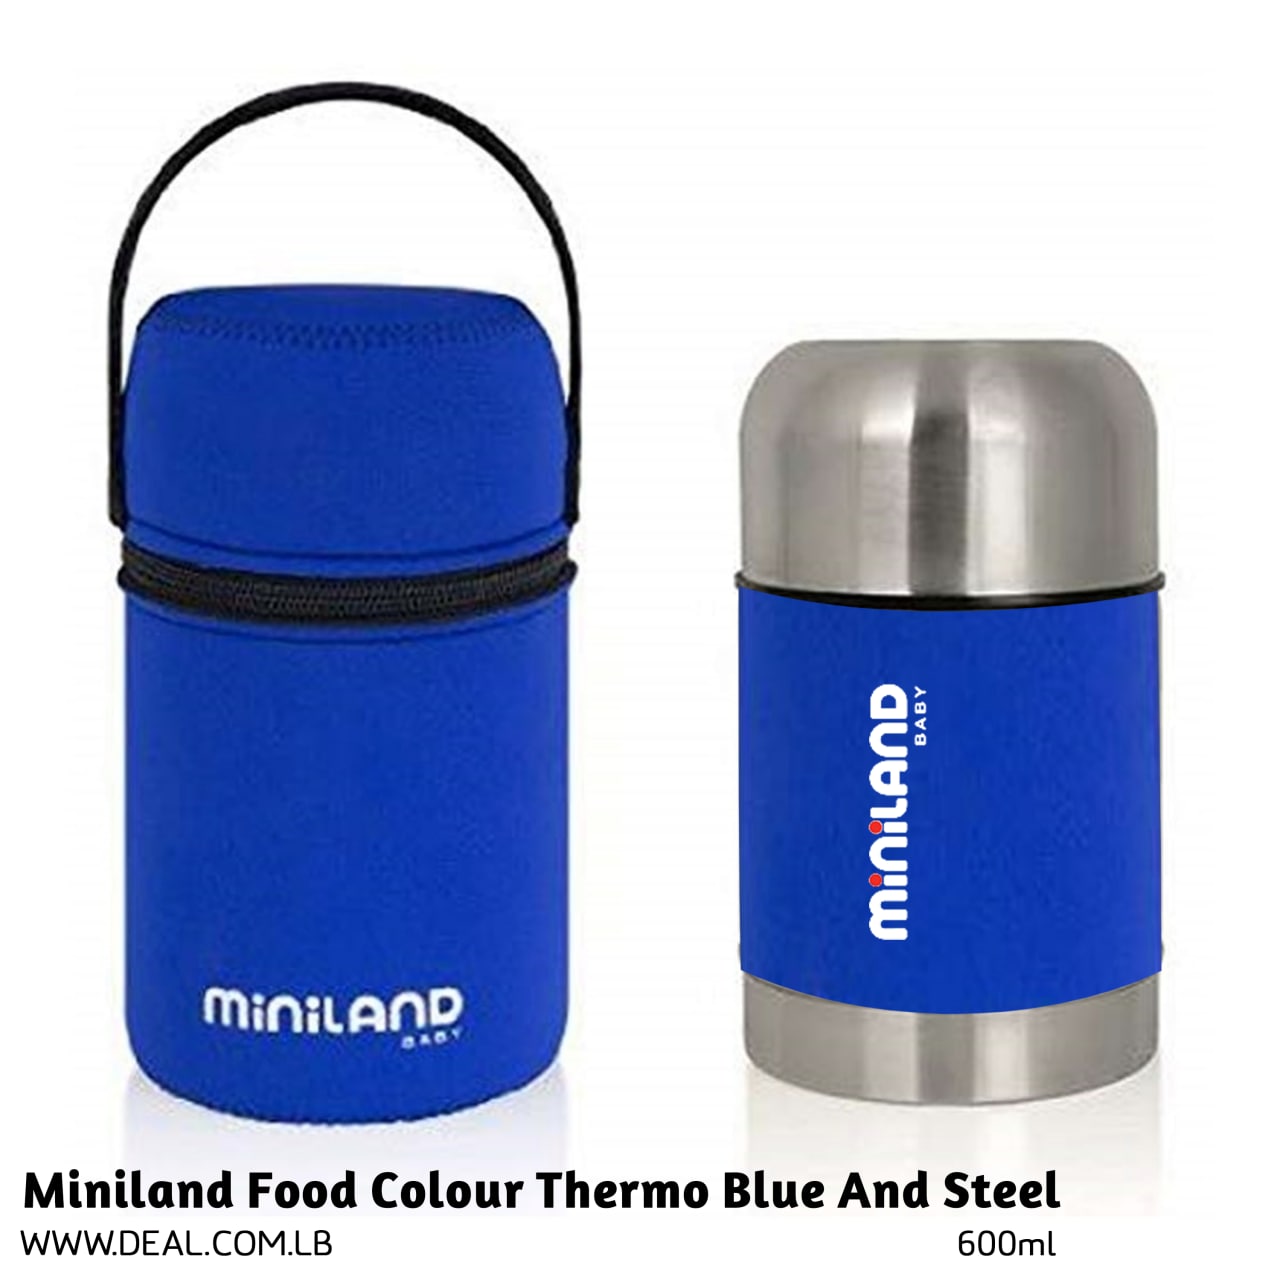 Miniland Food Color Thermo Blue And Steel